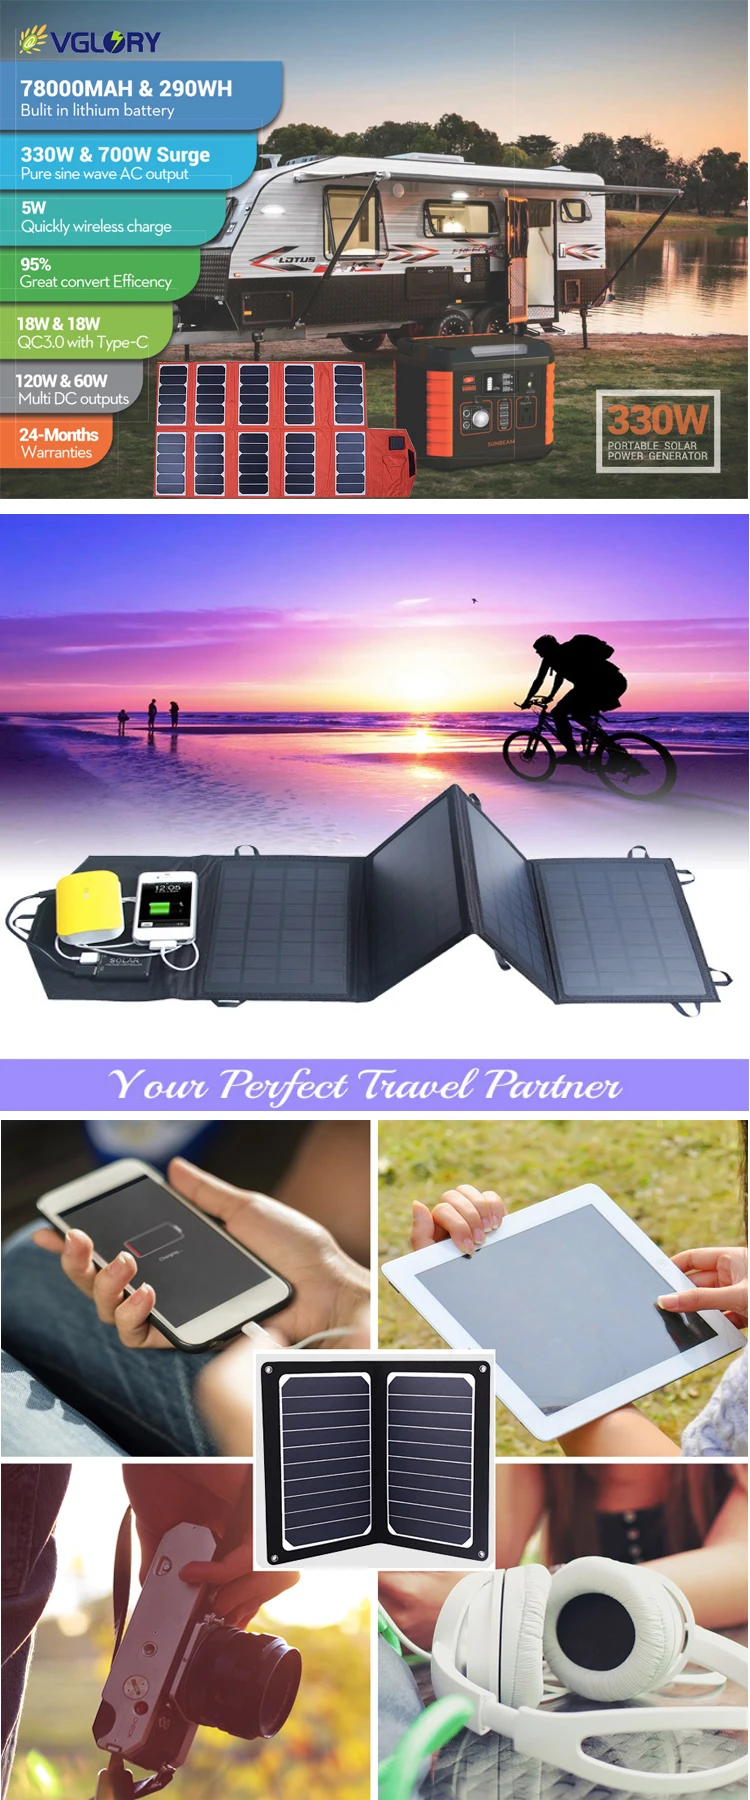 18v Ce Certificate Bendable Monocrystal Panel With Tuv Iec61215 Certif Solar Charger For Cellphone